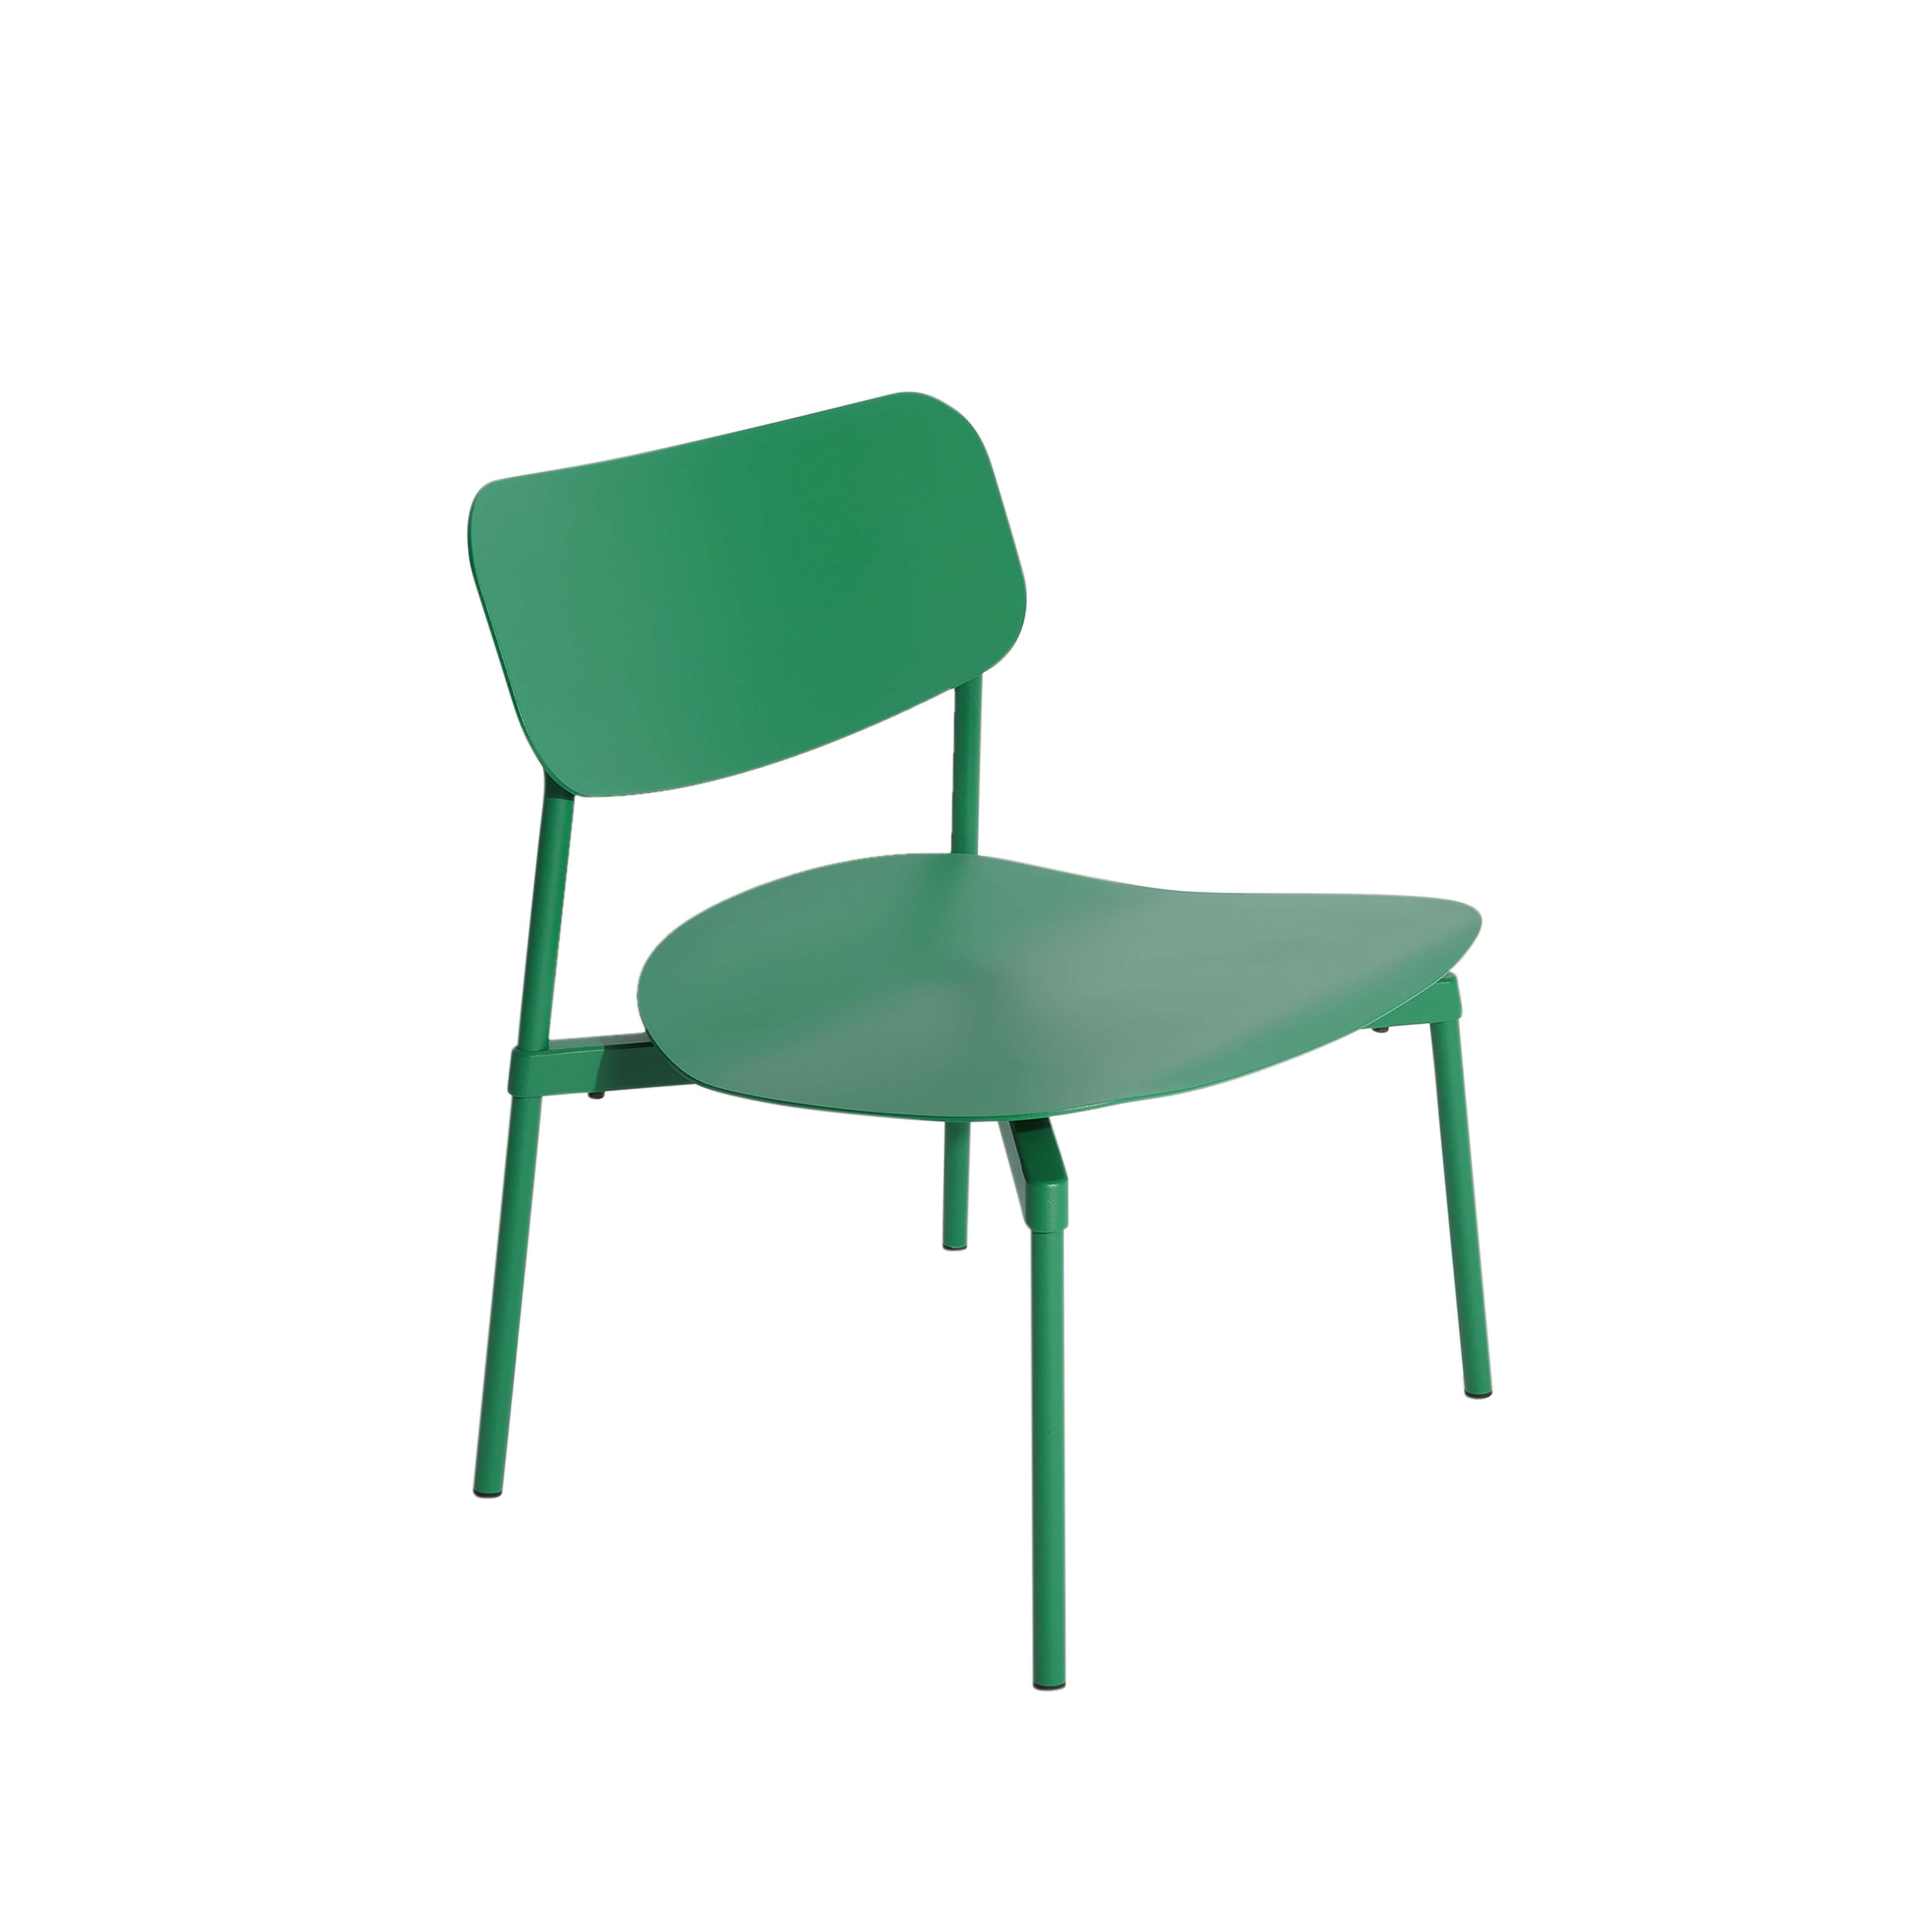 Petite Friture Fromme Lounge Armchair in Mint-green Aluminium by Tom Chung, 2020

The Fromme collection stands out by its pure line and compact design. Absorbers placed under the seating gives a soft and very comfortable flexibility to seats. Made